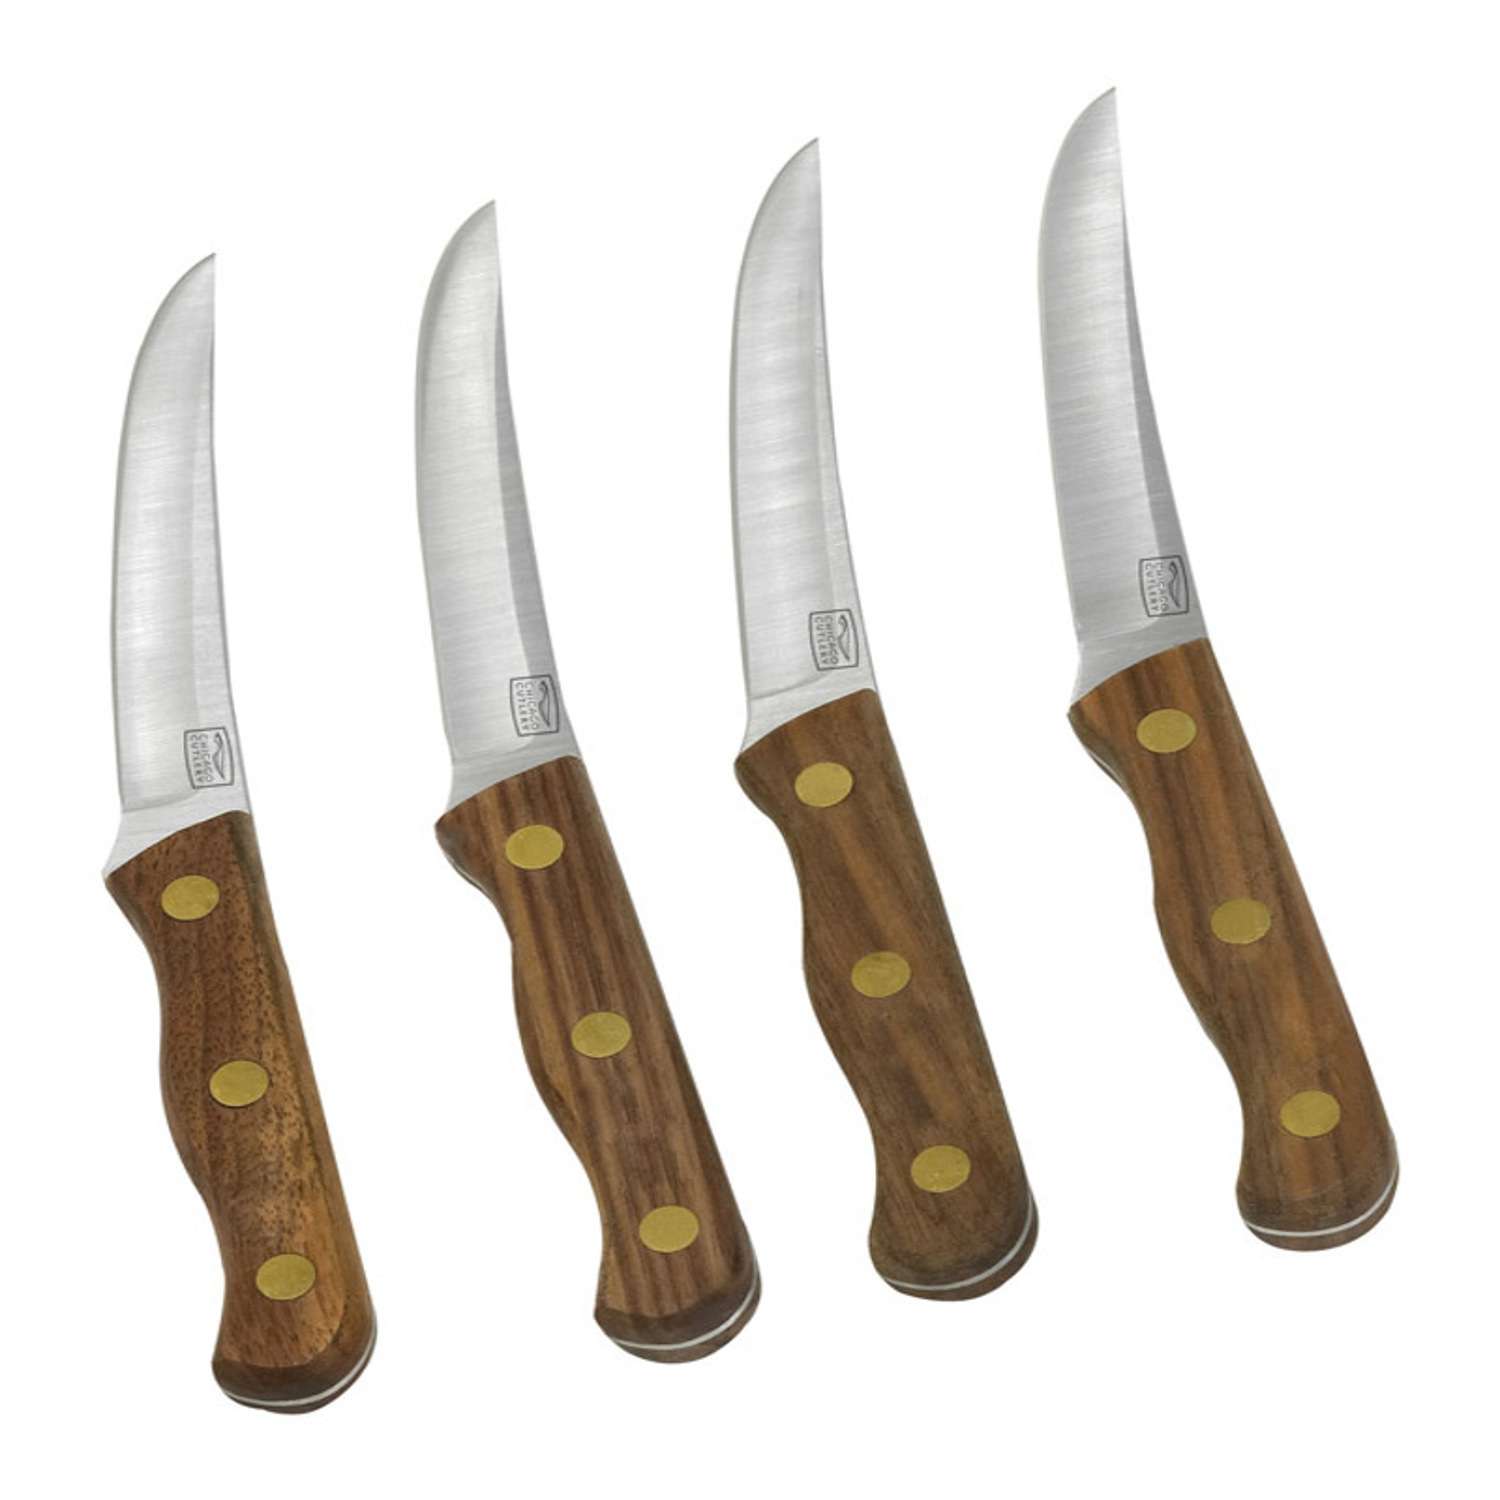 Chicago Cutlery Halsted 7 Pc. Steak Knife Set, Multicolor